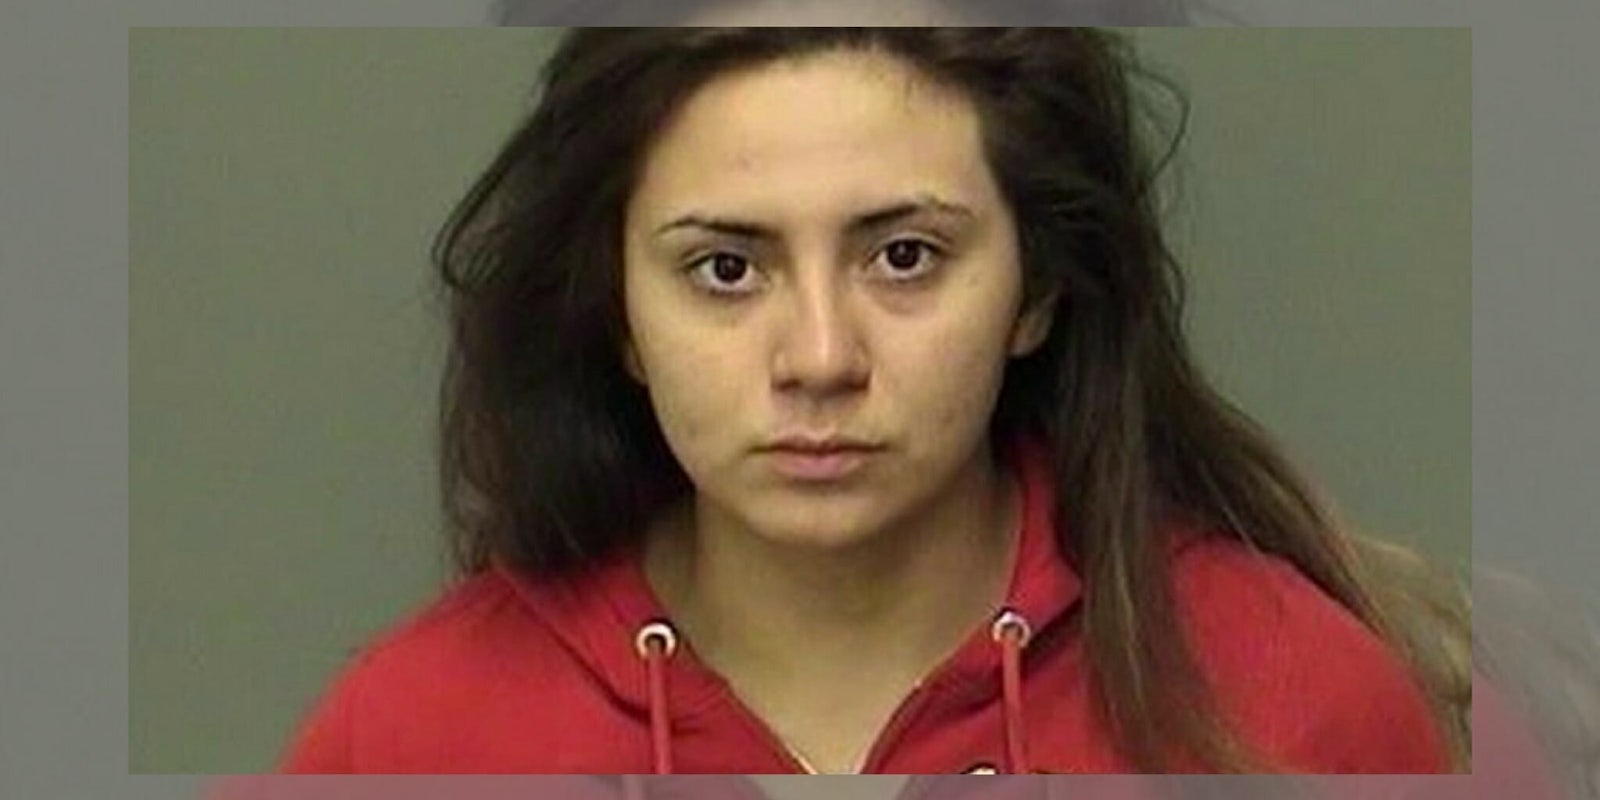 Obdulia Sanchez, who live streamed her sister's death on Instagram, was sentenced to six years and four months in prison.